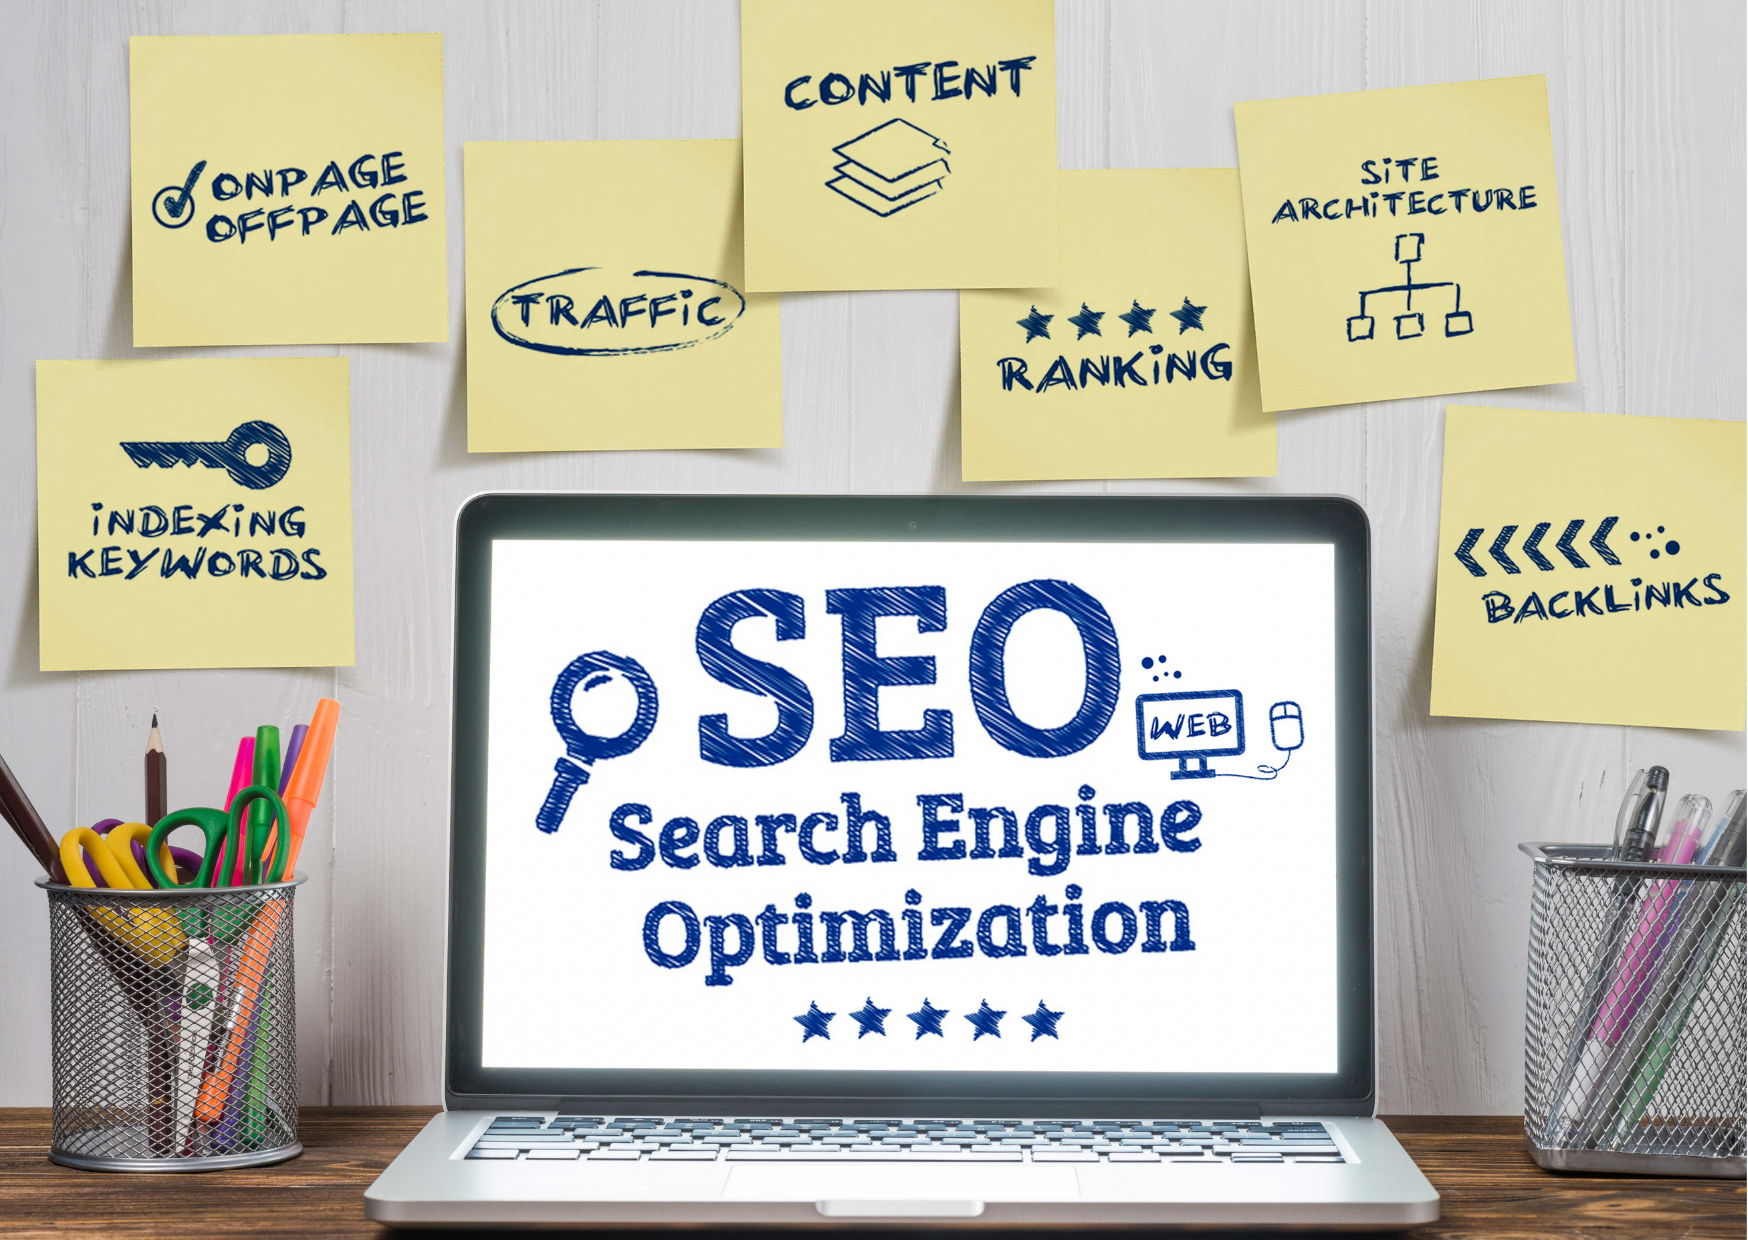 4 reasons why SEARCH ENGINE OPTIMIZATION (SEO) is a MUST for your energy website